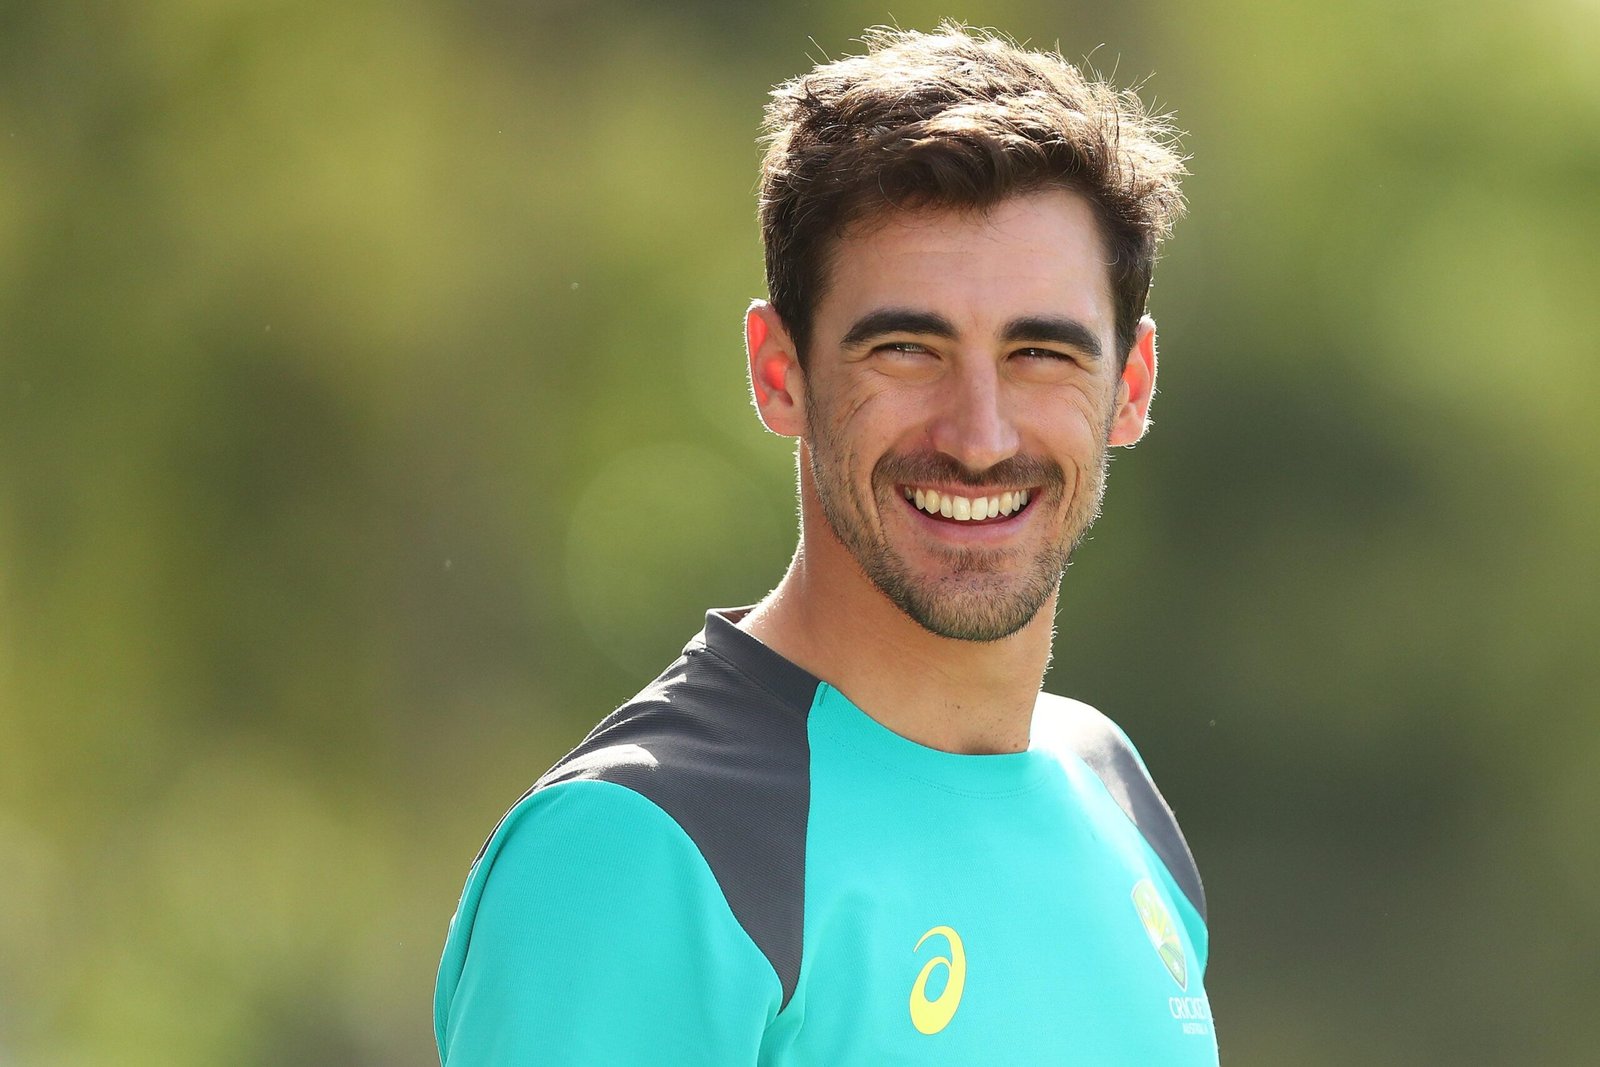 "I Have Finally Listened To Pat And Josh", Mitchell Starc Reveals The Deadliest Weapon That Cummins And Hazleewood Gave Him